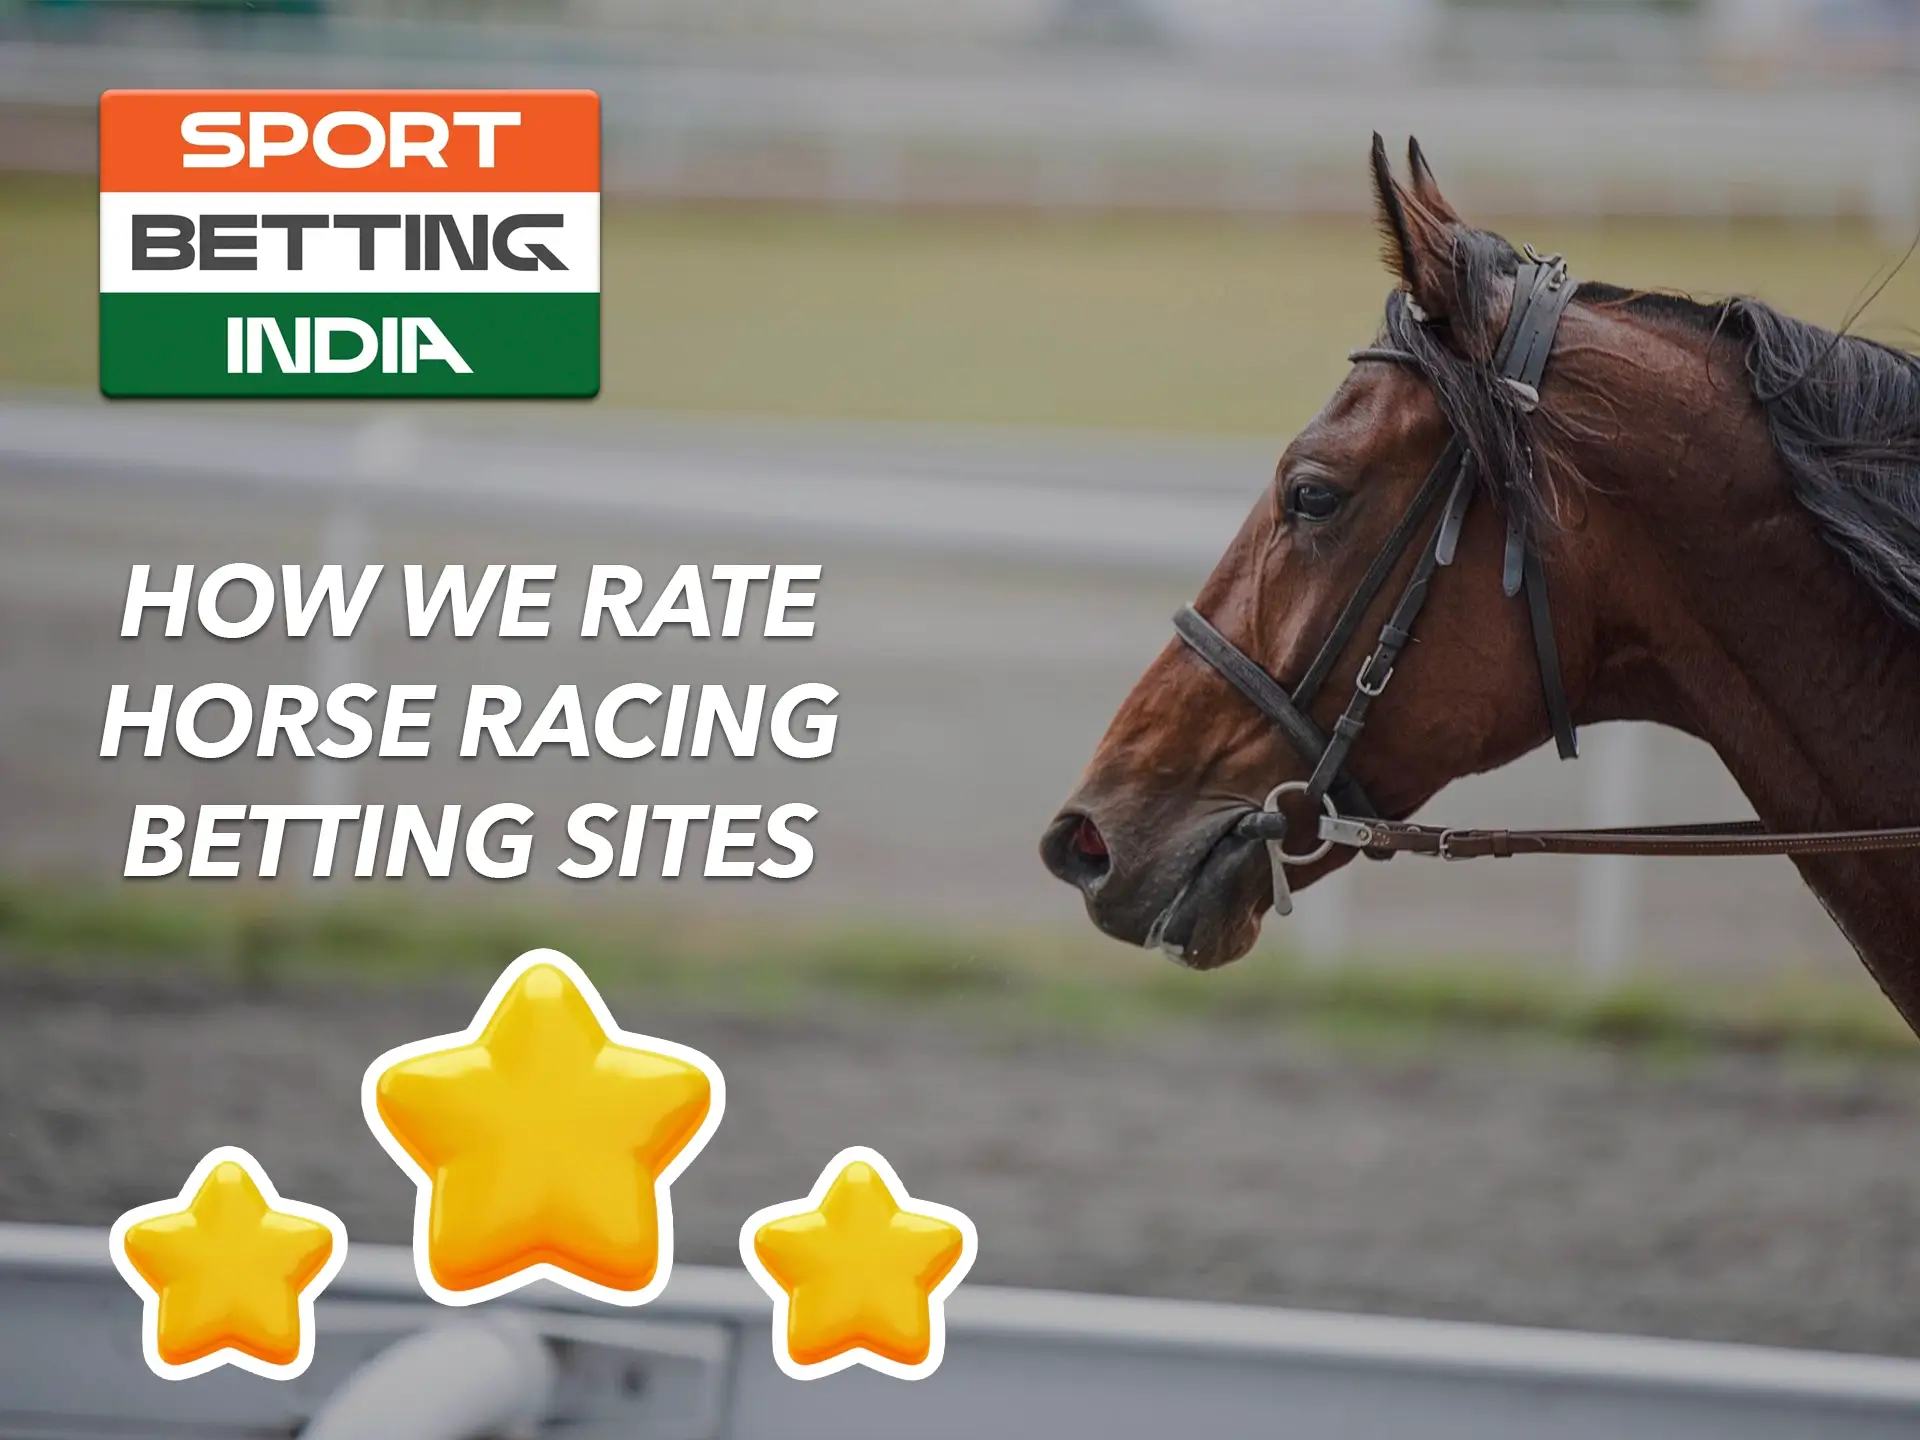 Pay attention to key factors when choosing a bookmaker to bet on horse racing.